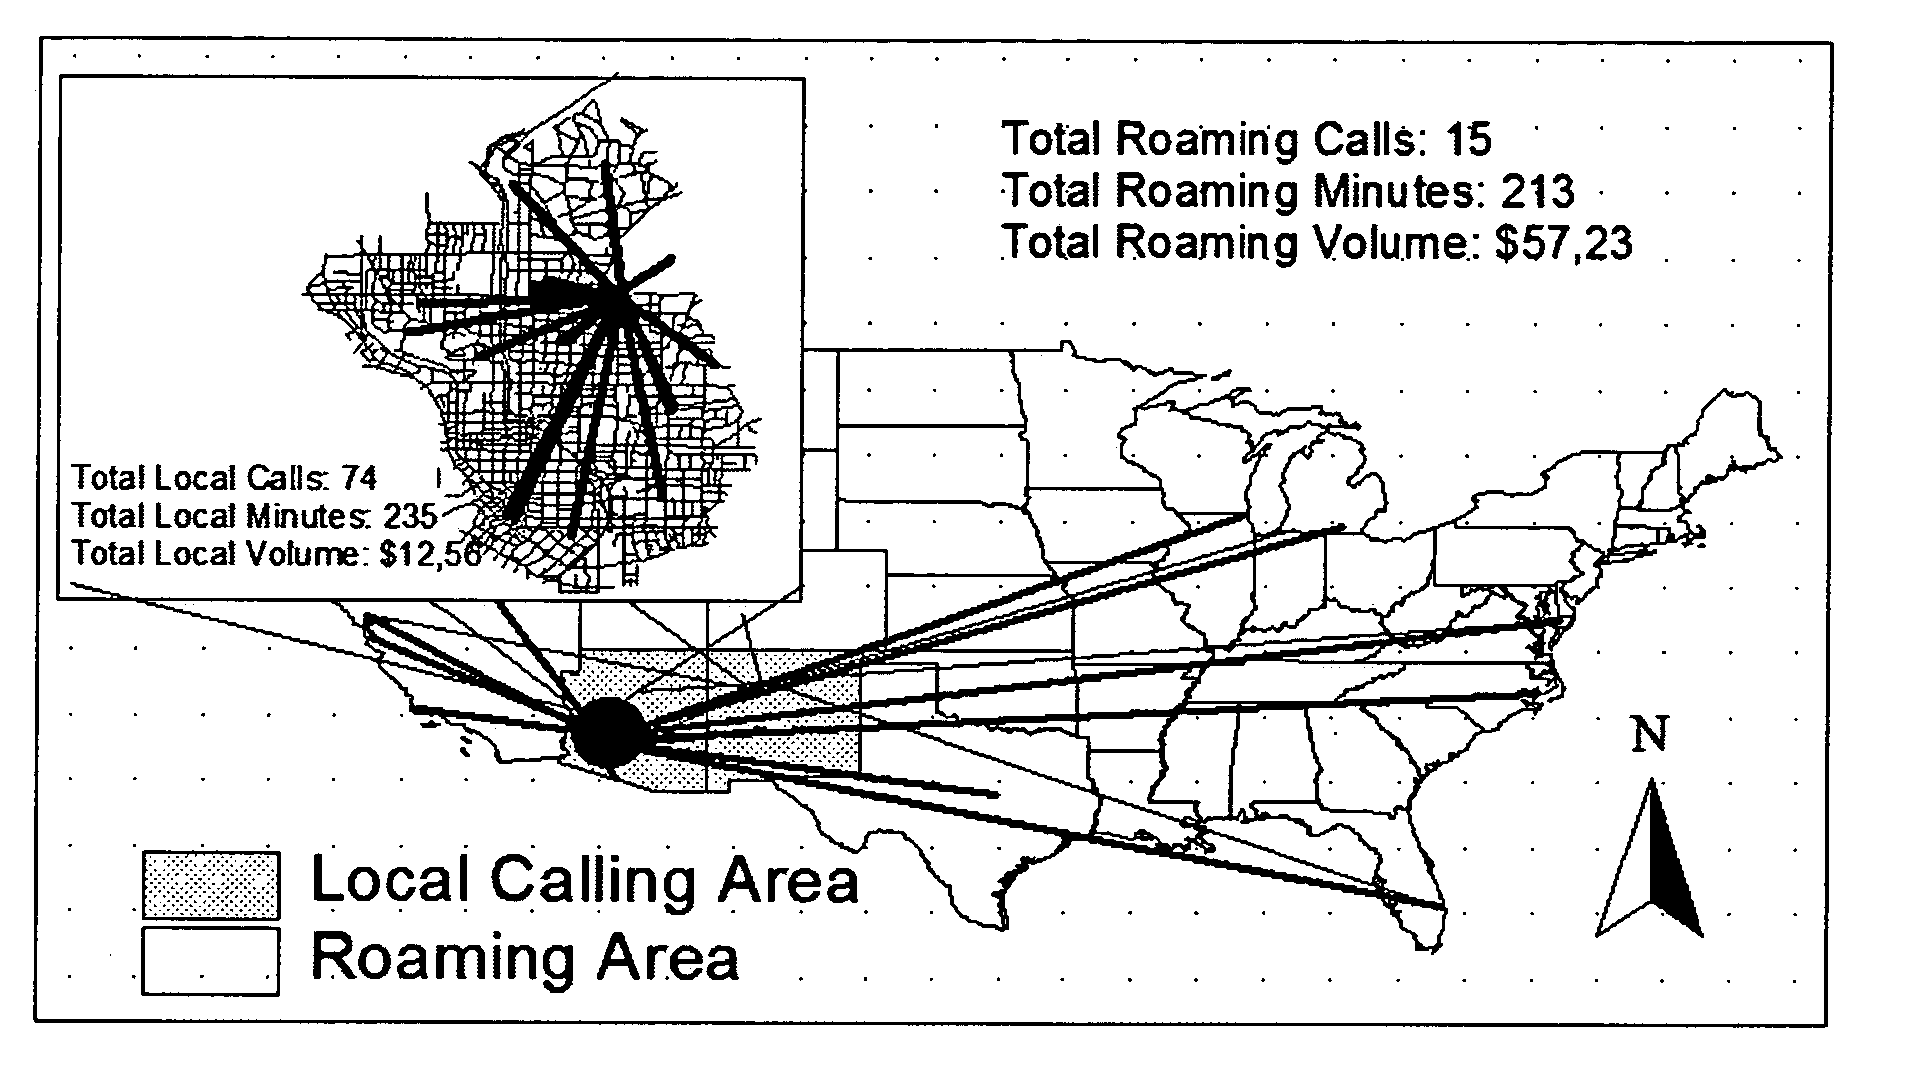 Call log maps embedded within or provided with telephone and pager billing statements